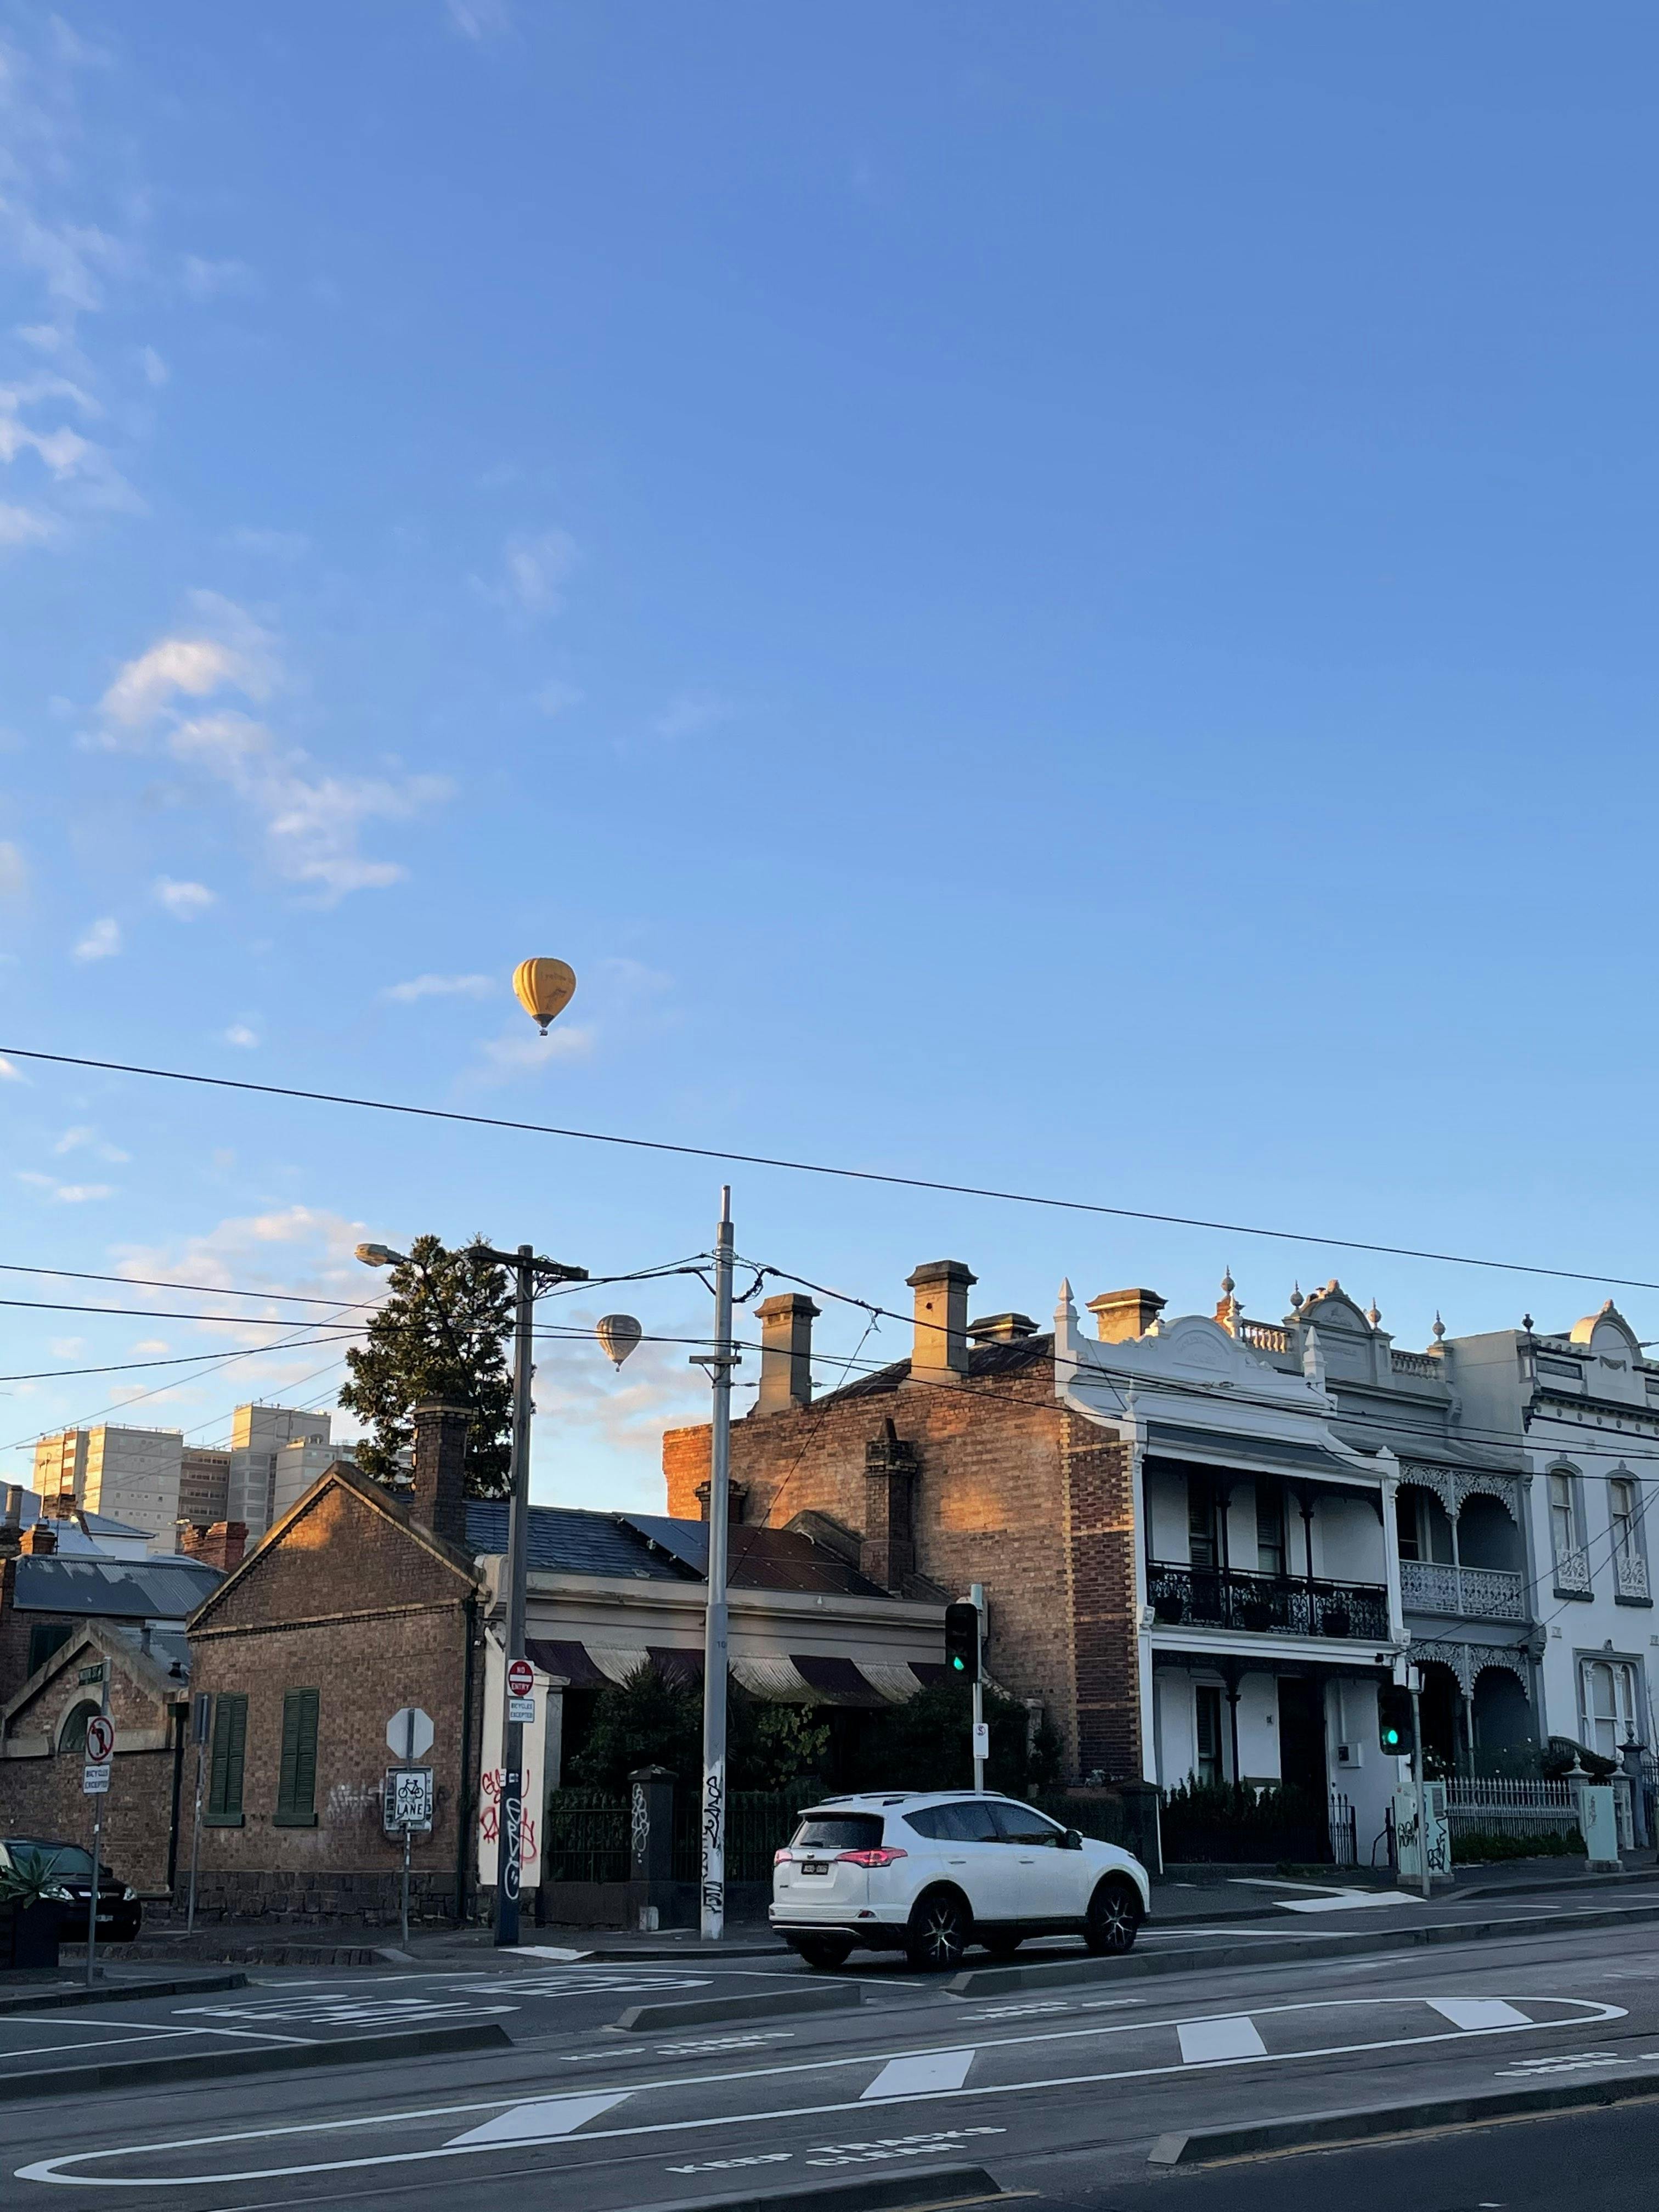 Cover image for blog post showing hot air ballon floating above Fitzroy terrace houses in Melbourne